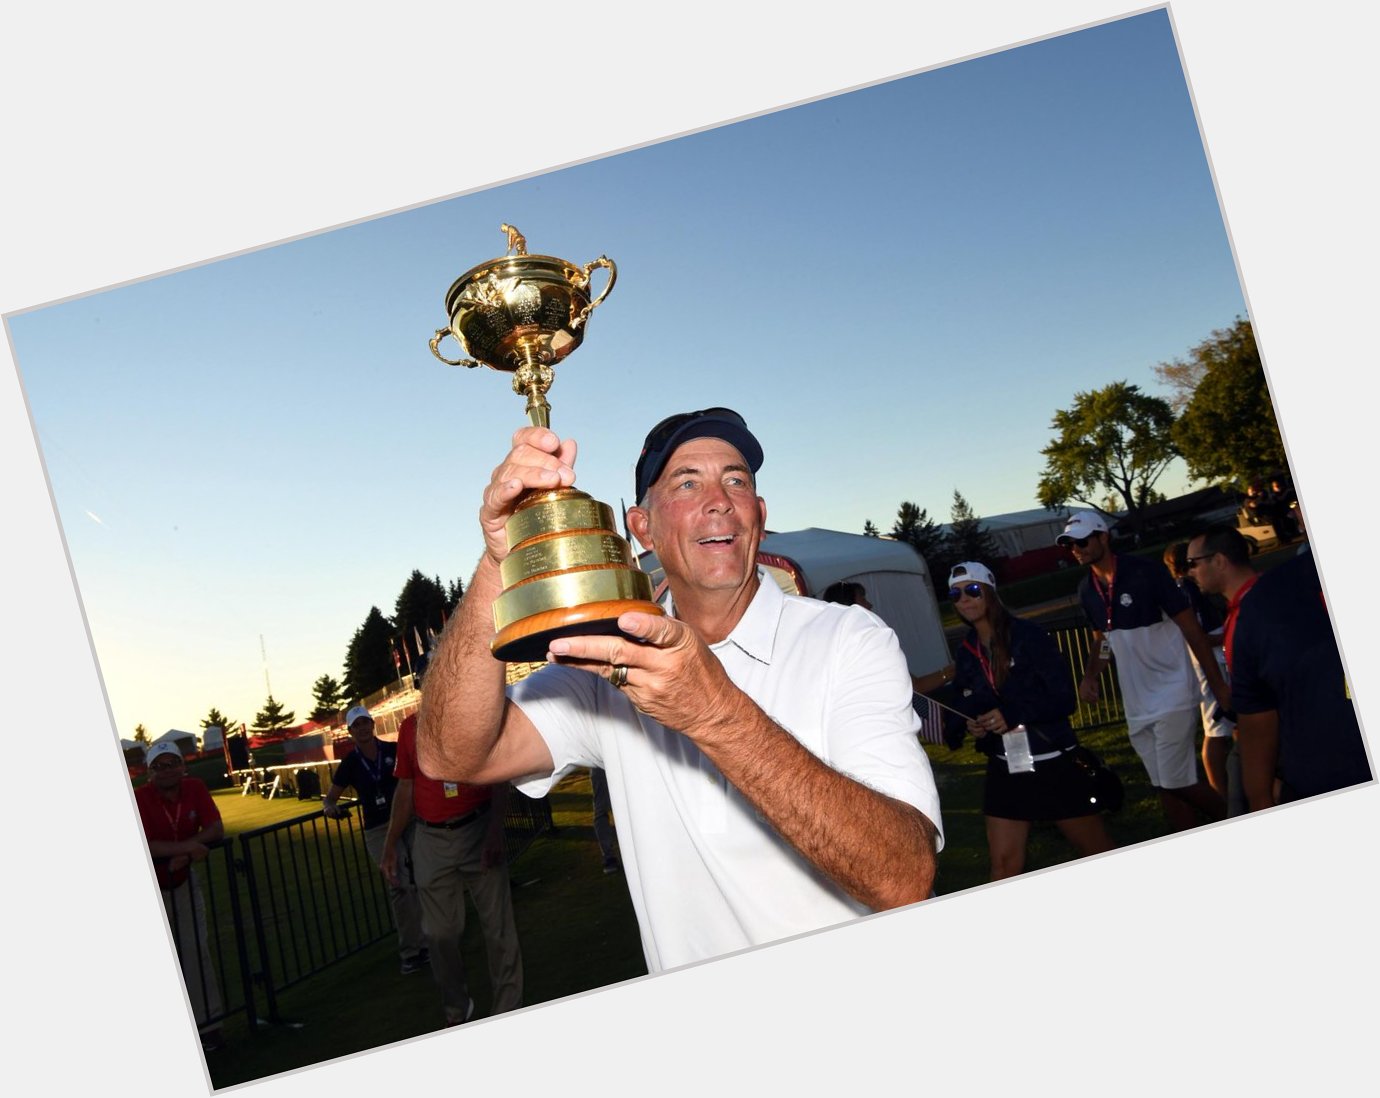 Join us in wishing vice-captain Tom Lehman a happy 58th birthday! 